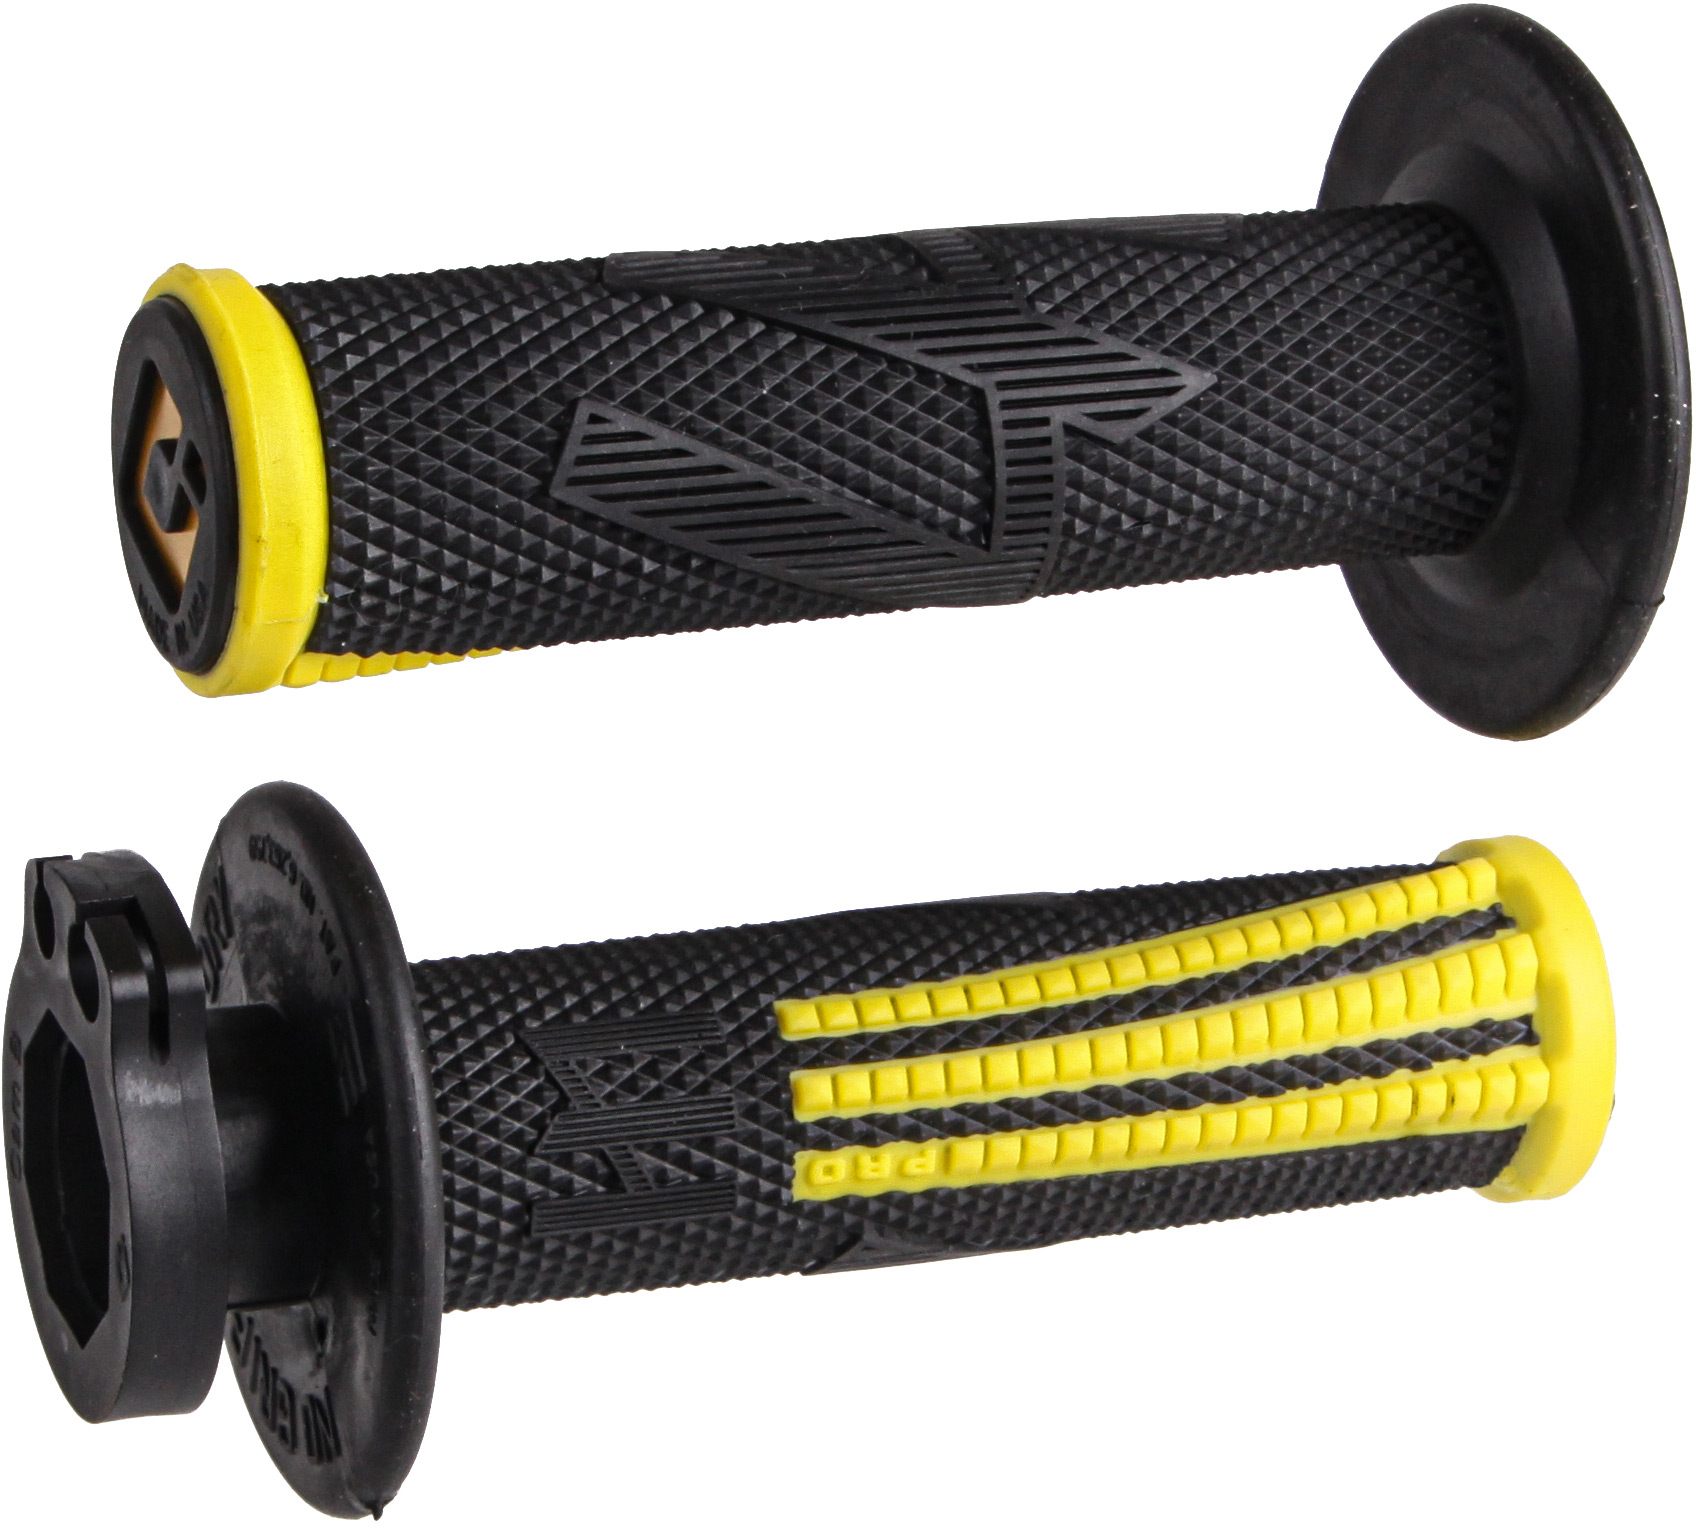 EMIG2 PRO Lock On V2 Grip in Yellow and Black colors